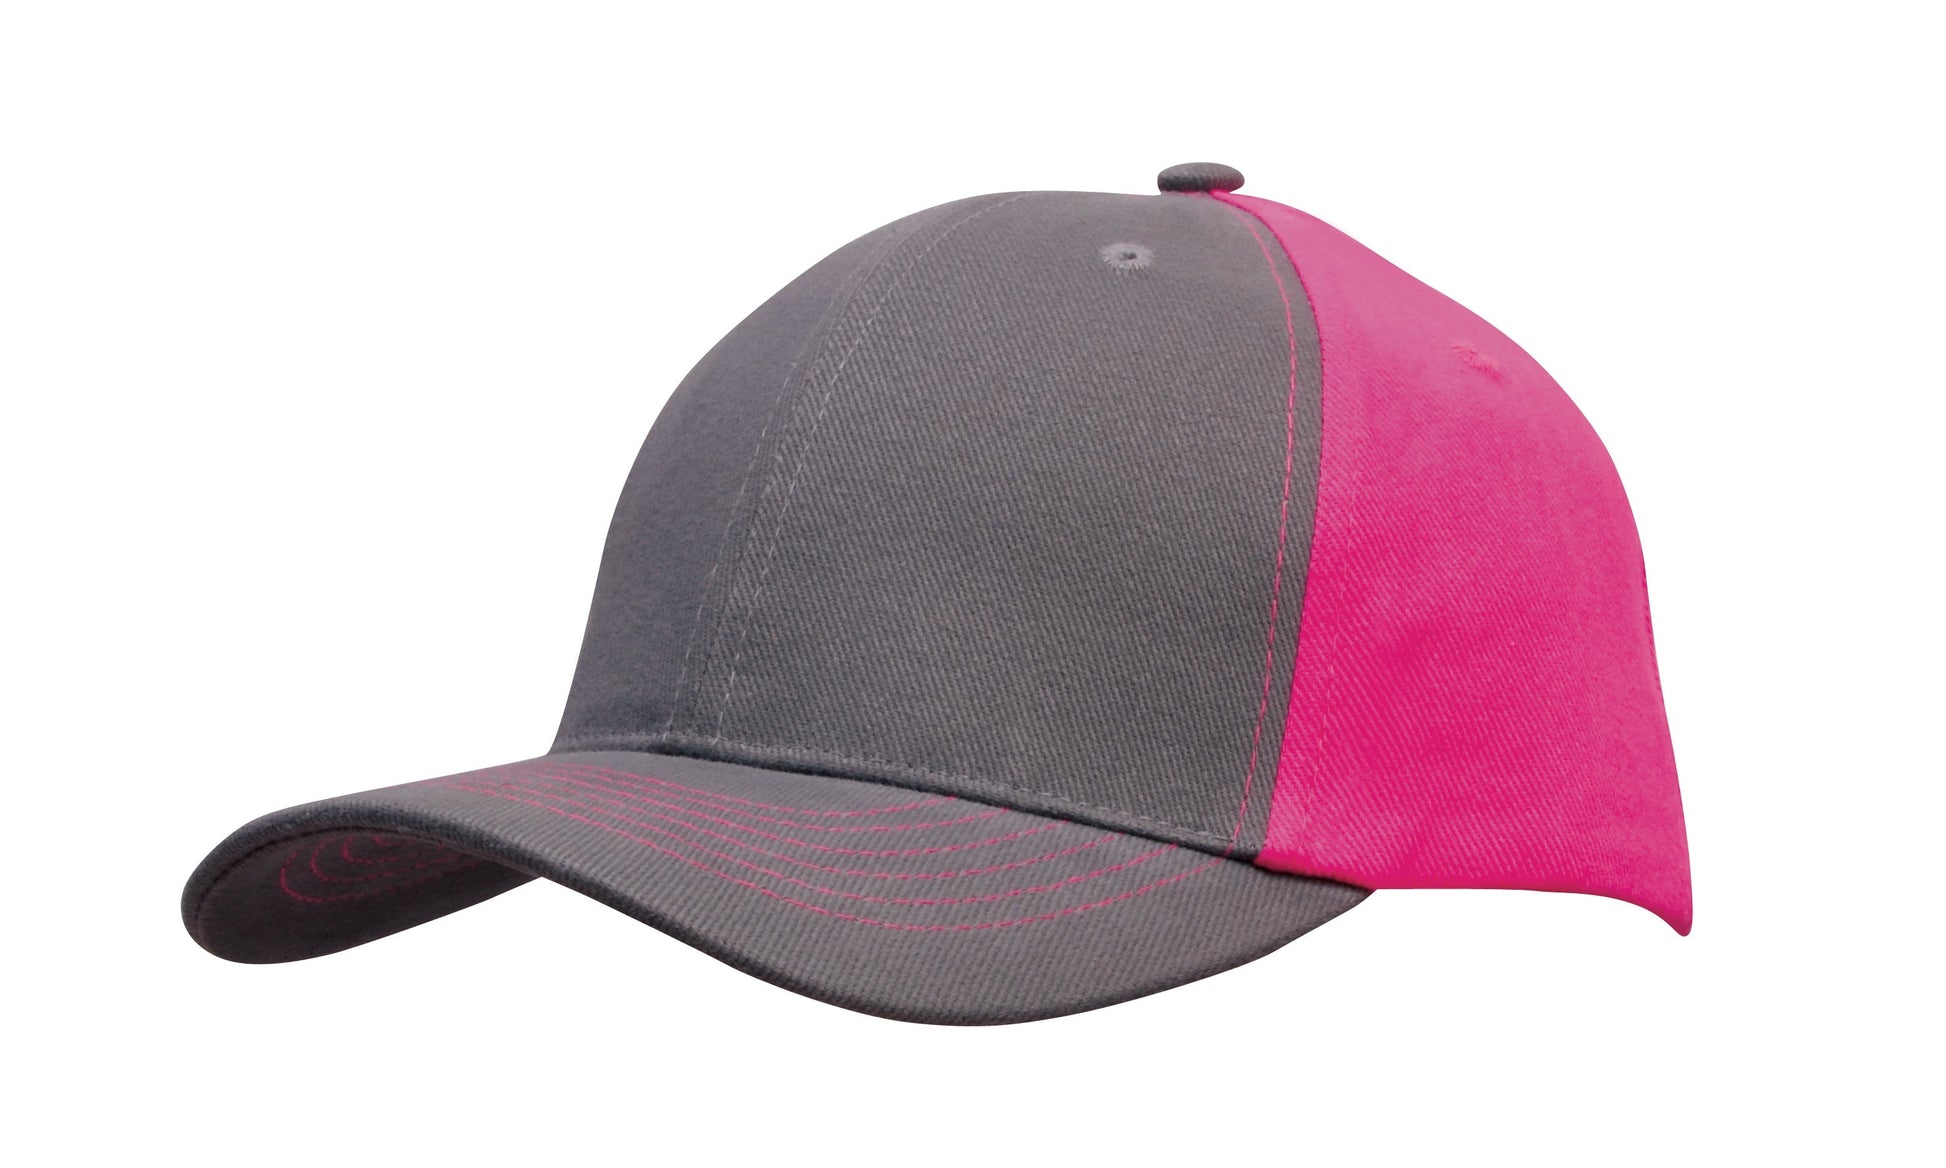 Headwear Brushed Heavy Cotton 2 Tone X12 - 4001 Cap Headwear Professionals Charcoal/Hot Pink One Size 